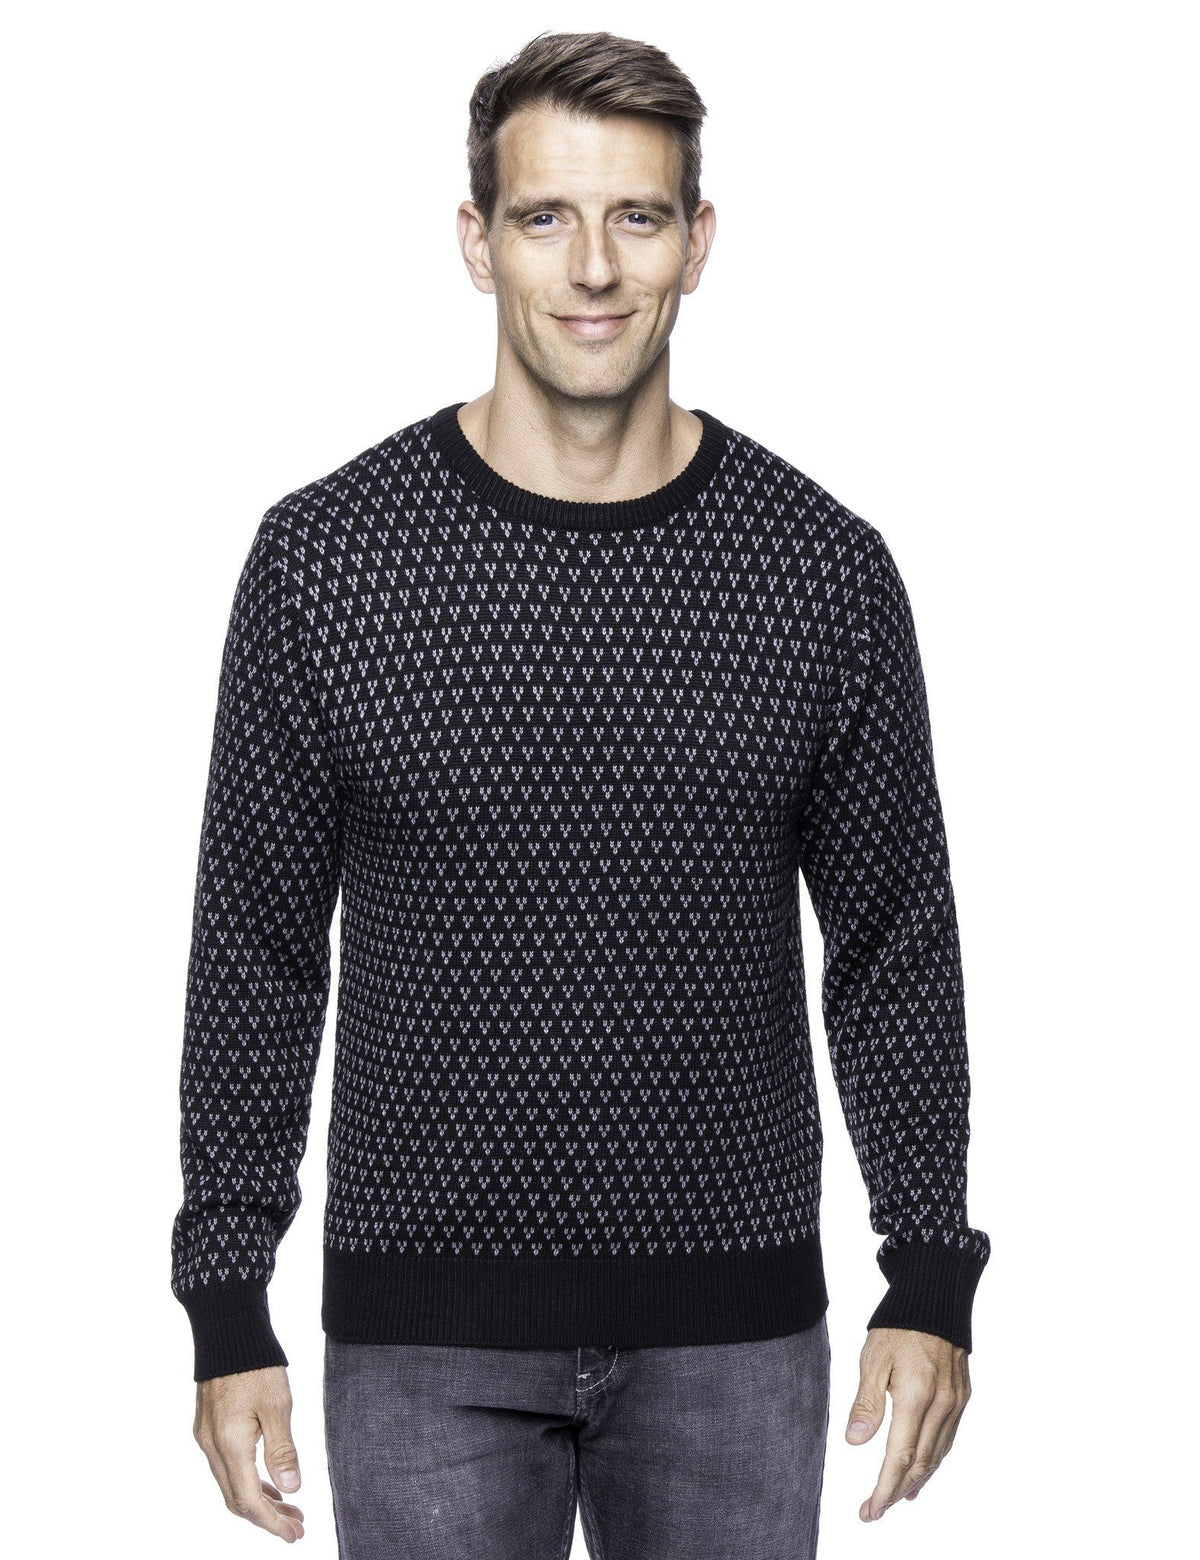 Men's Wool Blend Crew Neck Pullover Sweater with Jacquard Effect - Black/Heather Grey